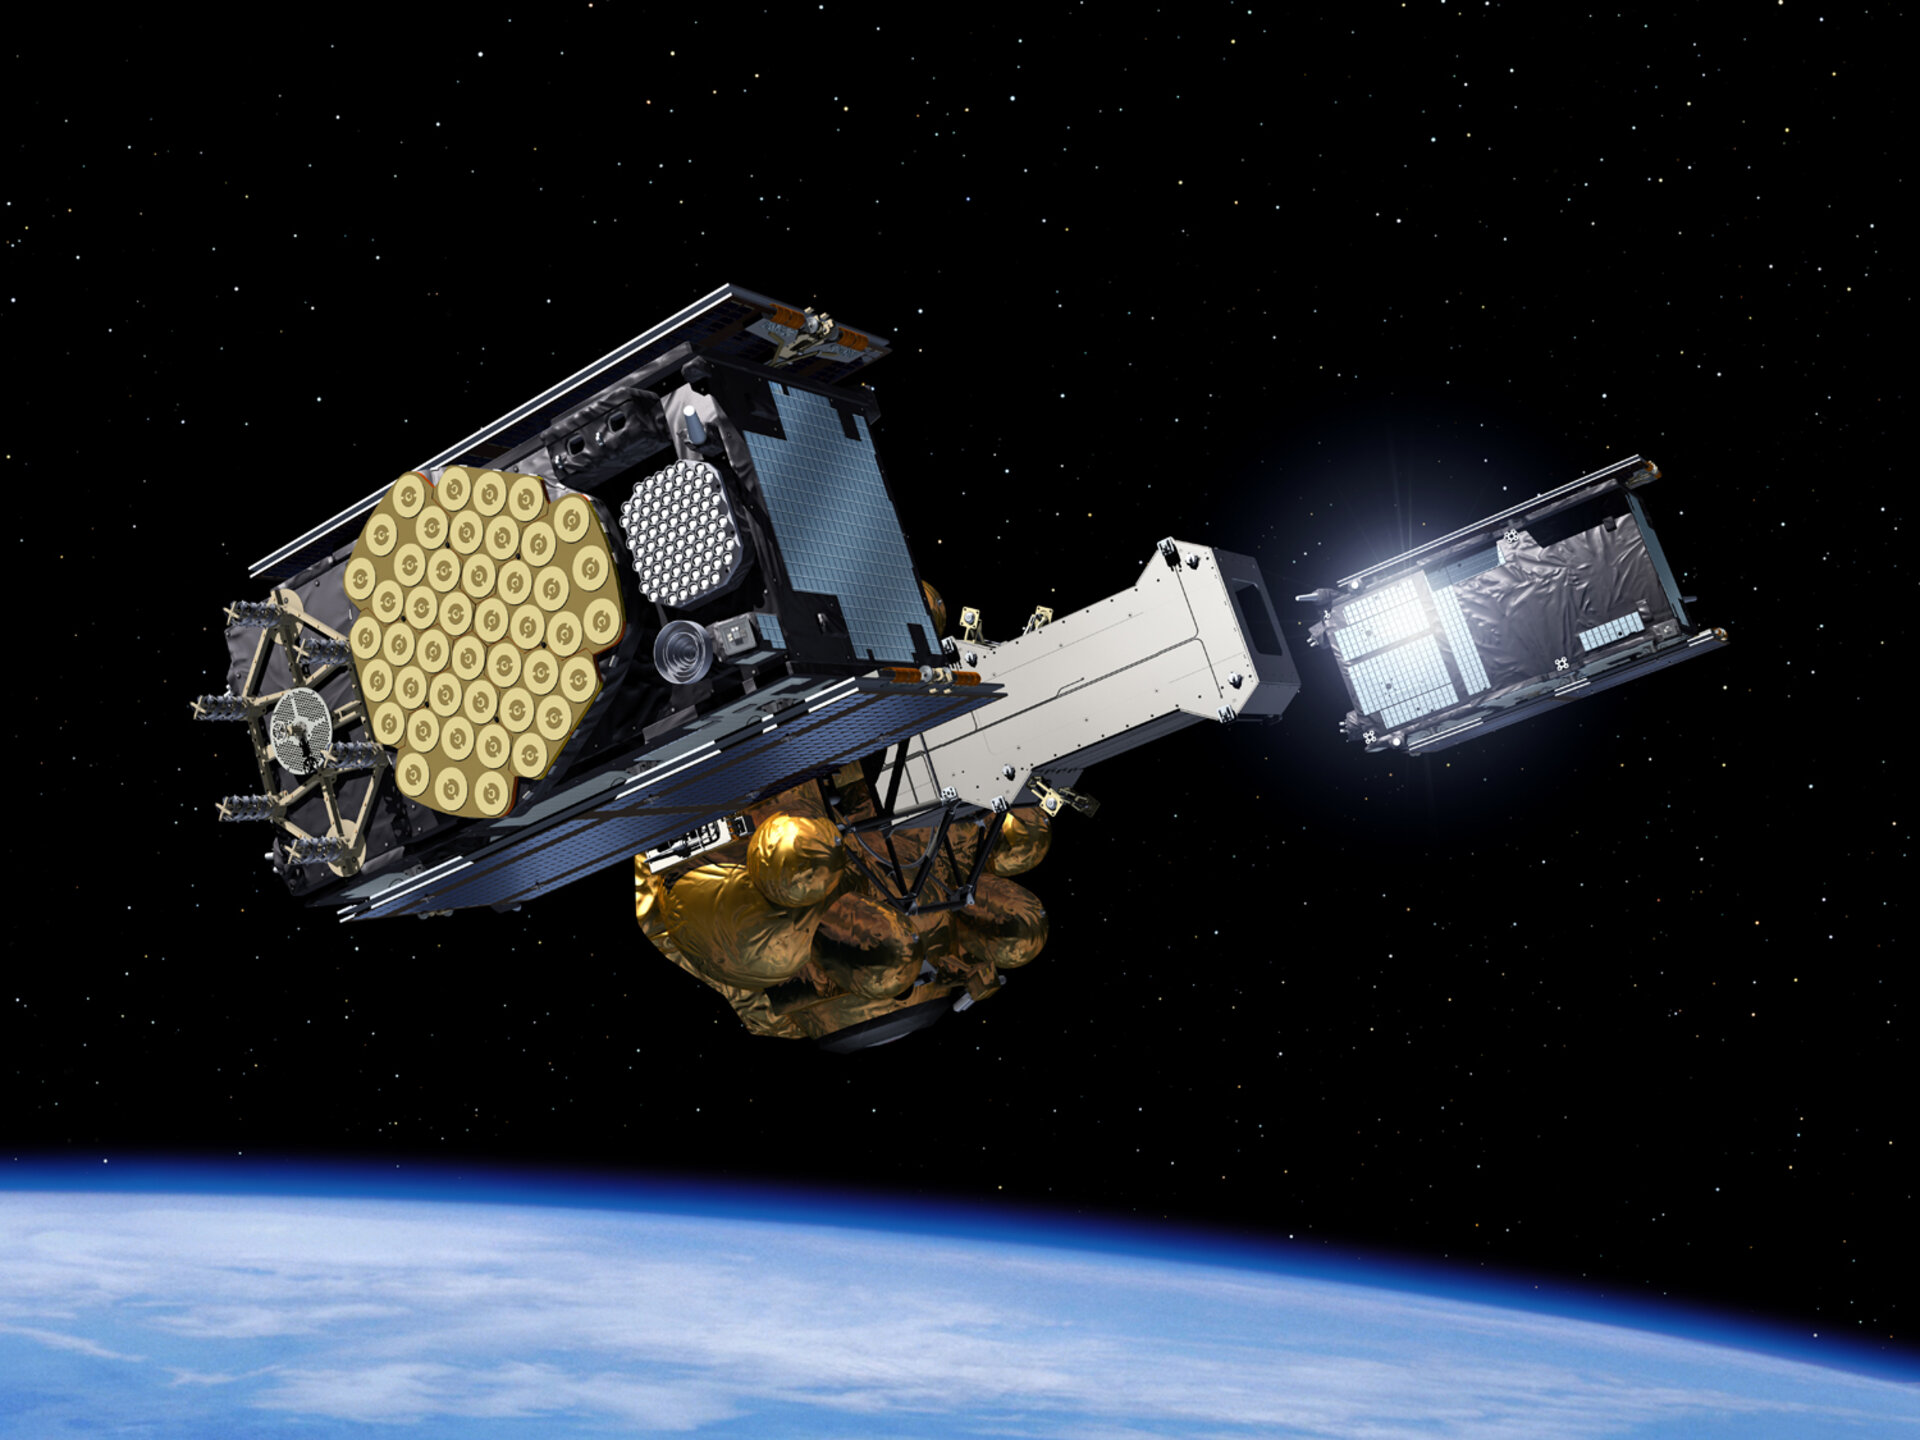 Galileo satellites ejected from dispenser